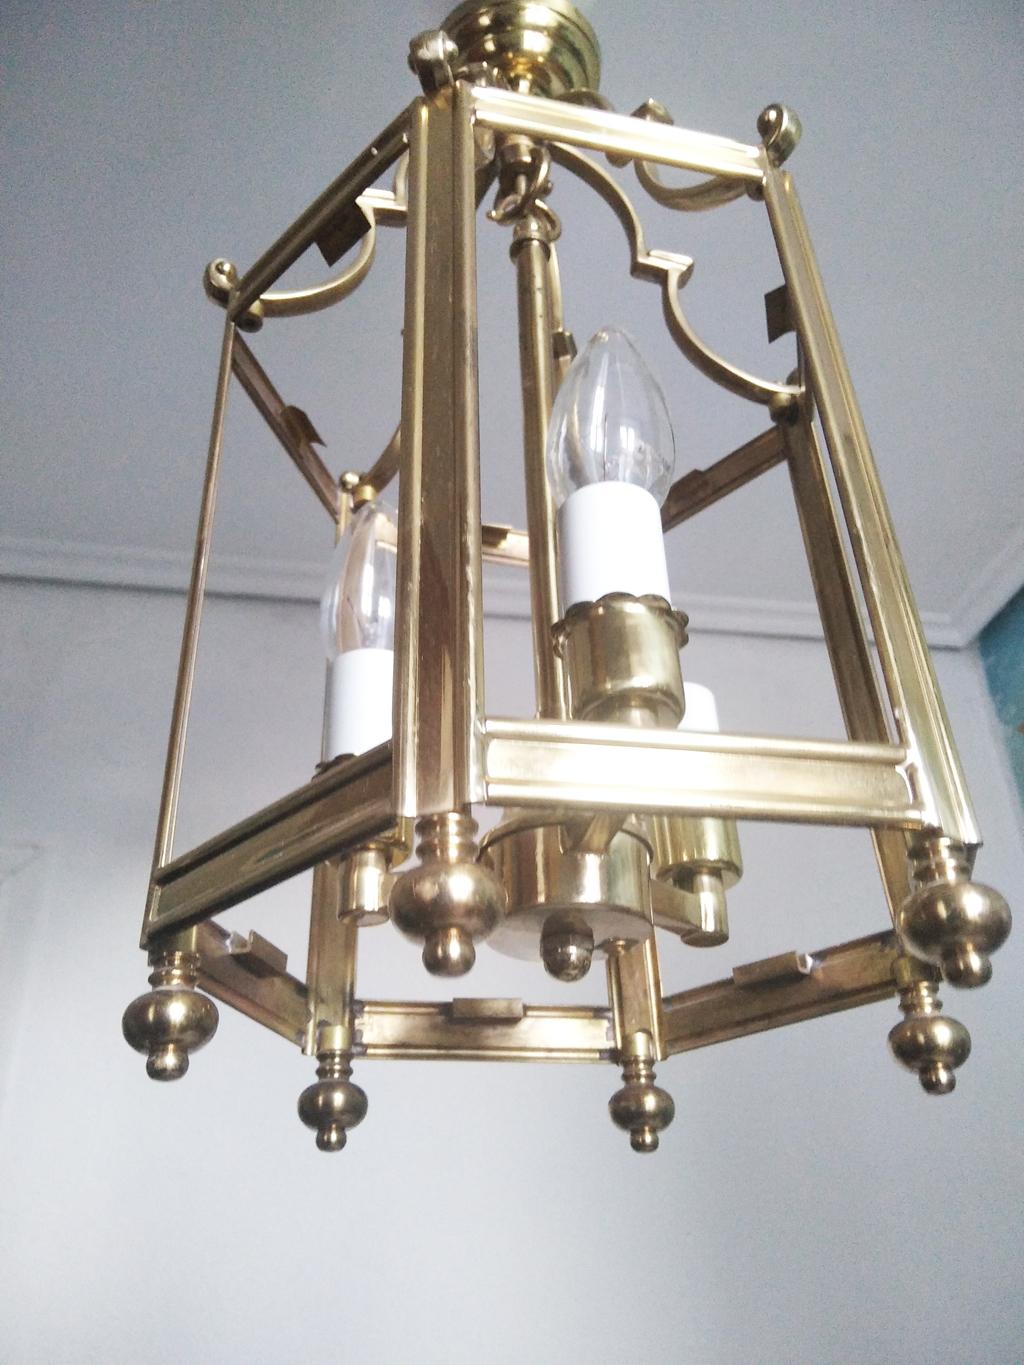 Mid-Century Modern Lantern Brass Glod Lighting from the Mid 20th Century, France For Sale